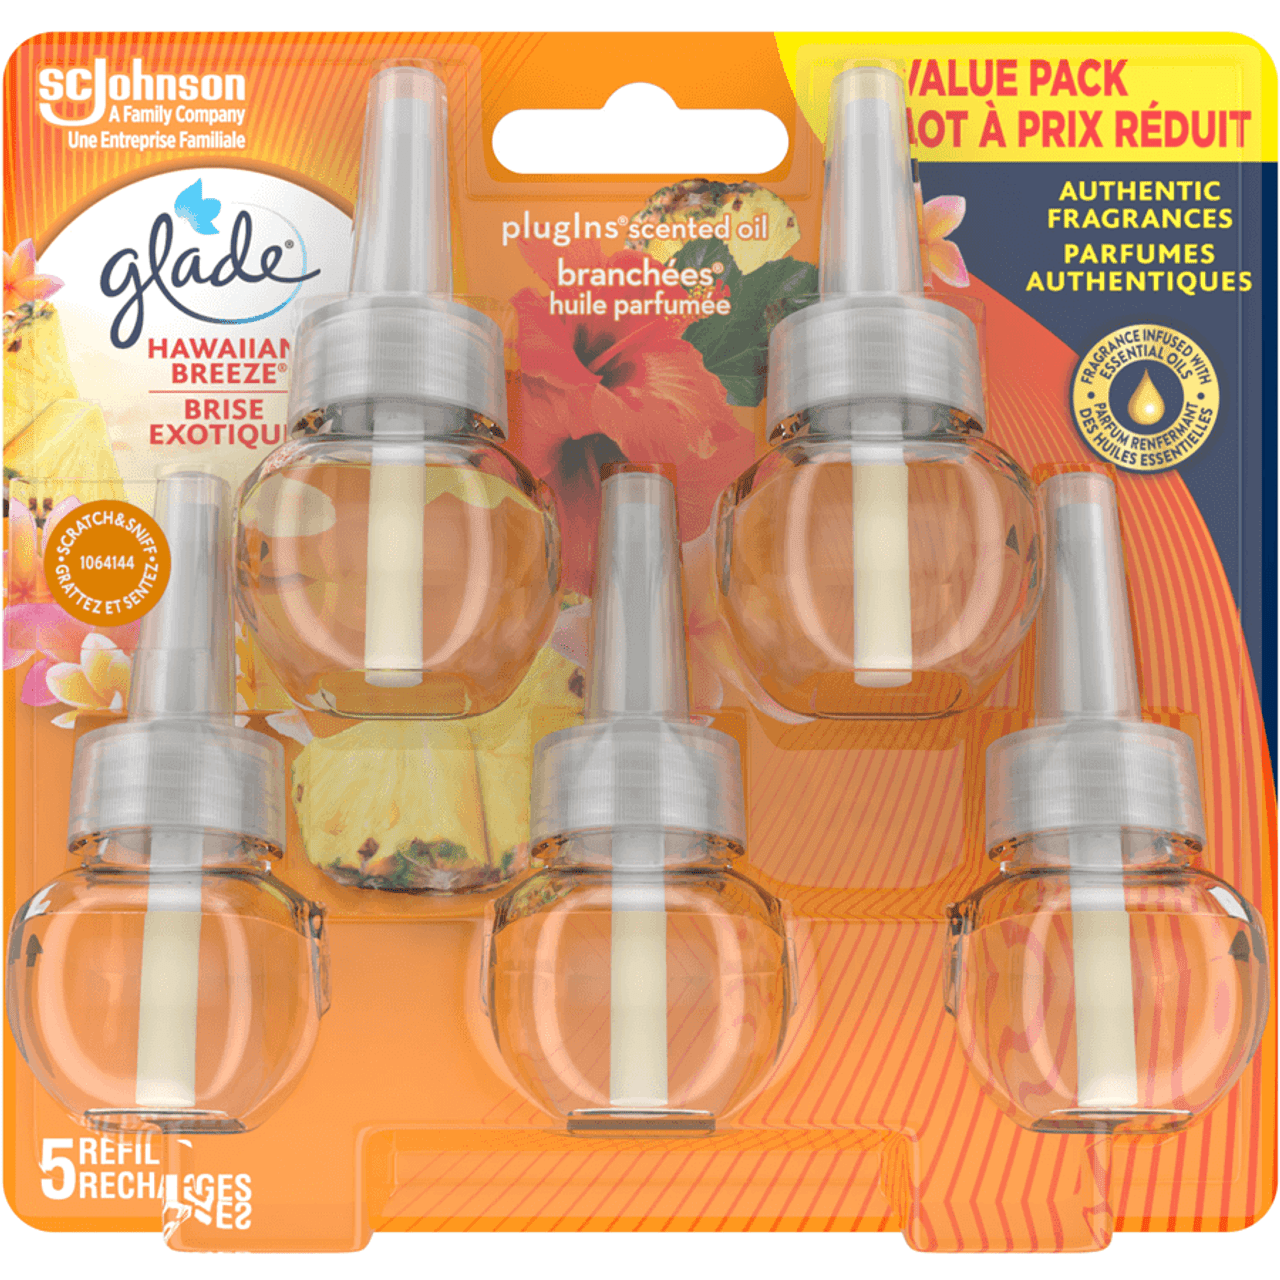 Glade PlugIns Paradise Scented Oil 5 Refill, Hawaiian Breeze(4/Case)-Chicken Pieces